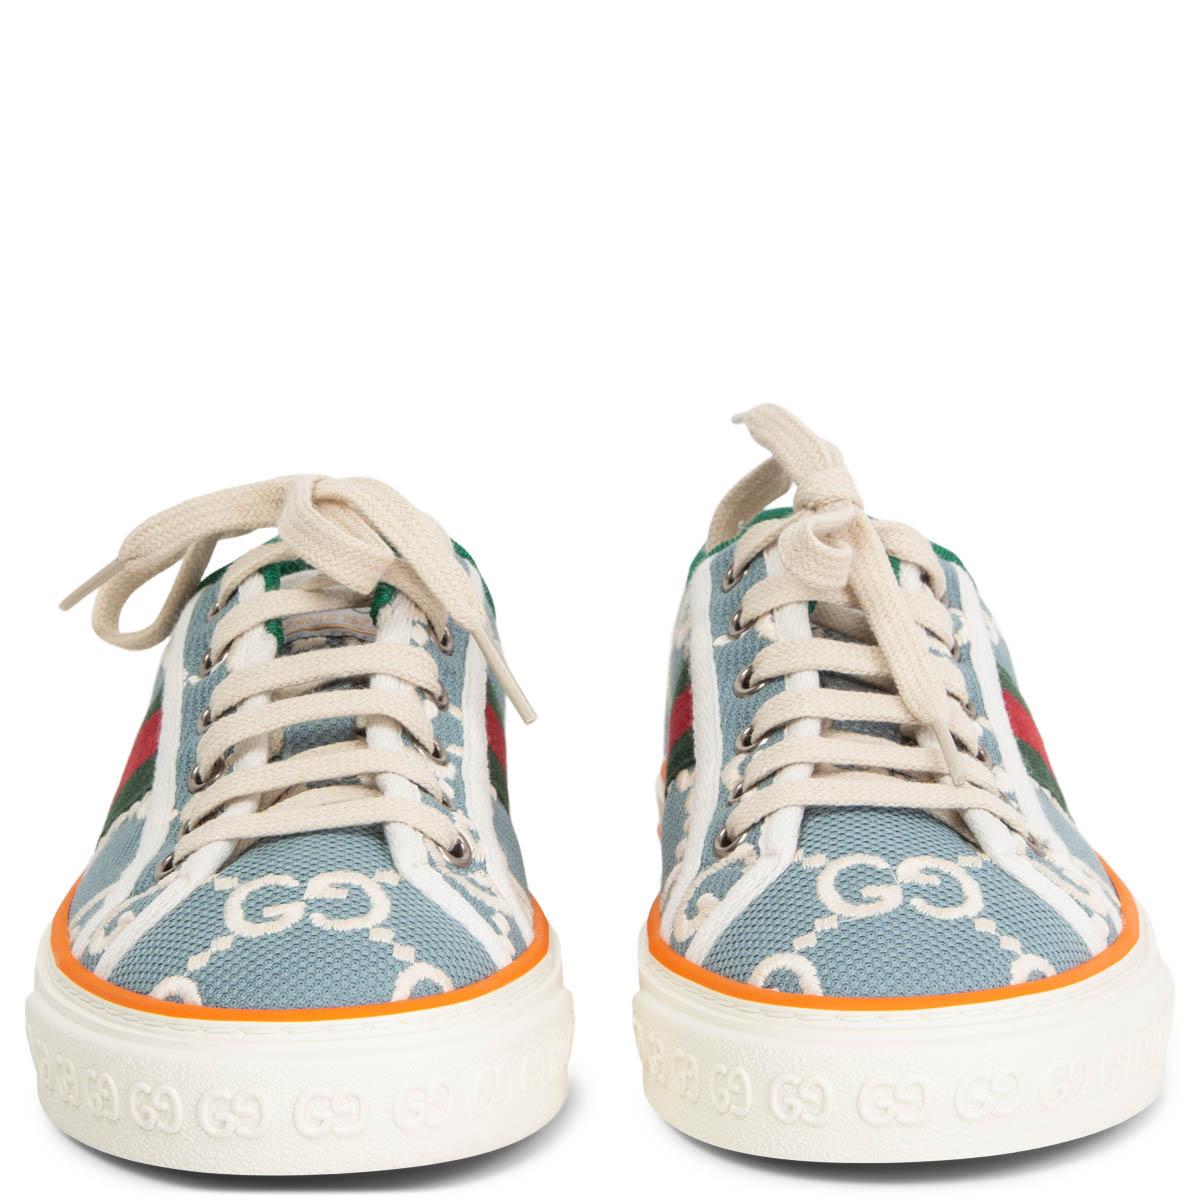 100% authentic Gucci Tennis 1977 sneaker crafted from light blue organic jacquard denim. With a with allover GG motif and signature red and green Web stripe on the side. Brand new. Come with dust bags. 

Measurements
Imprinted Size	37.5
Shoe